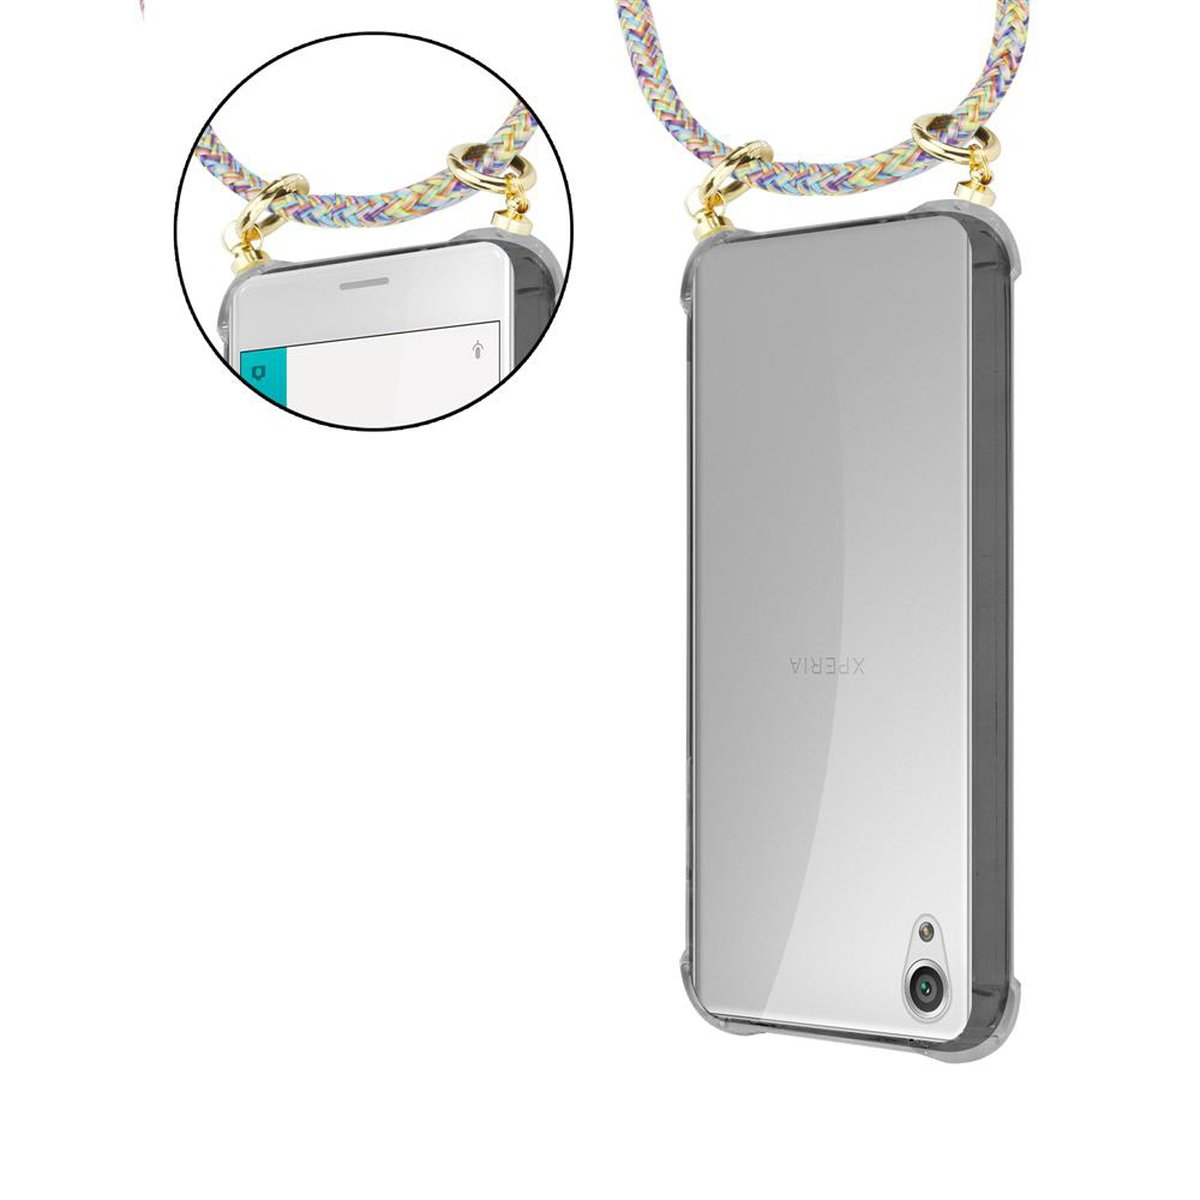 Gold mit und Sony, Handy Hülle, abnehmbarer Backcover, RAINBOW CADORABO X, Ringen, Xperia Kette Band Kordel